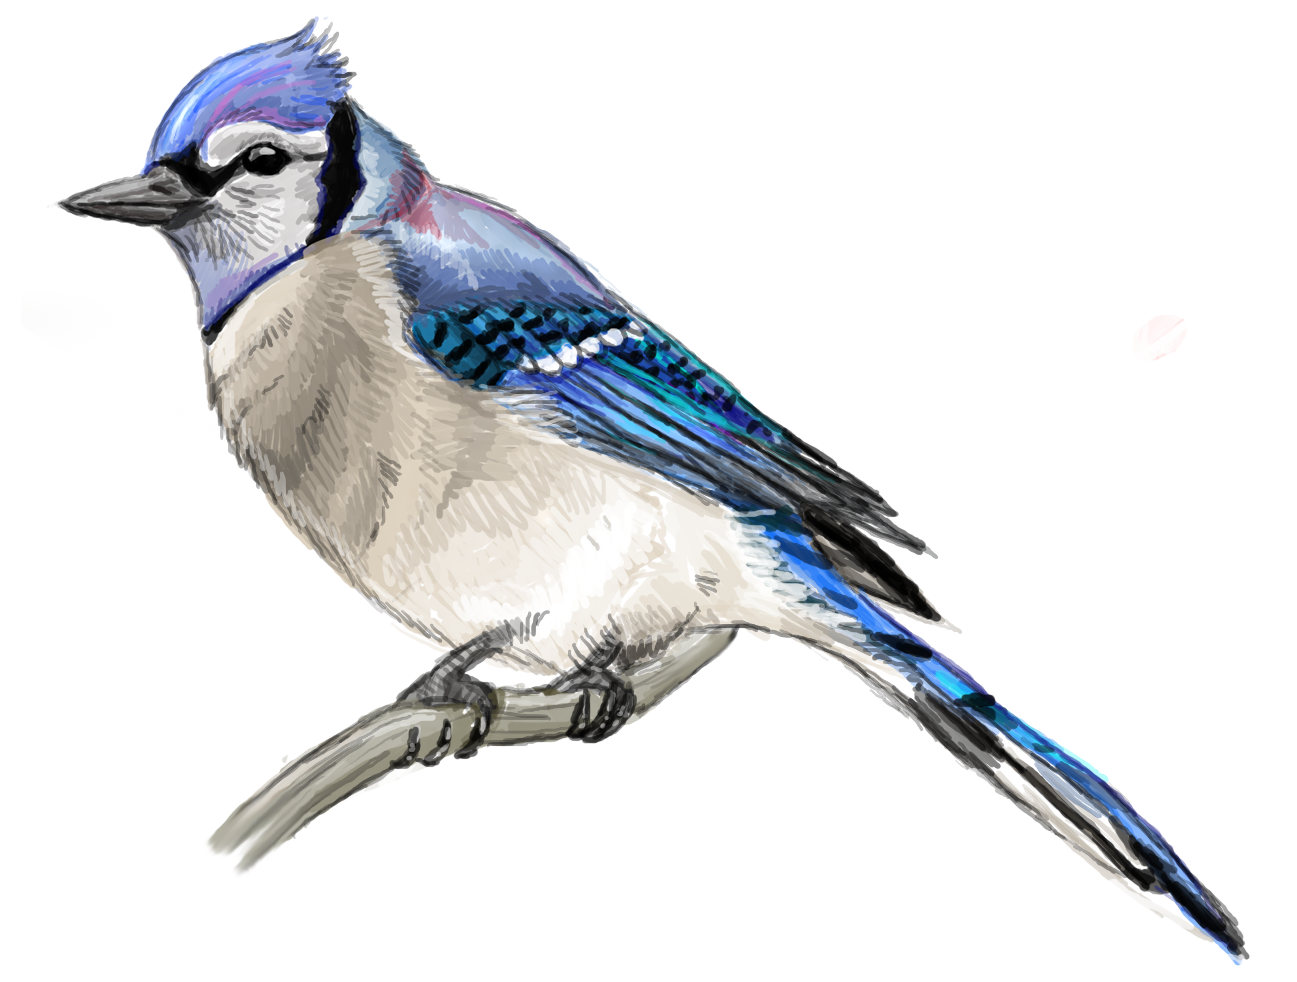 Bluejay by Tianithen on DeviantArt